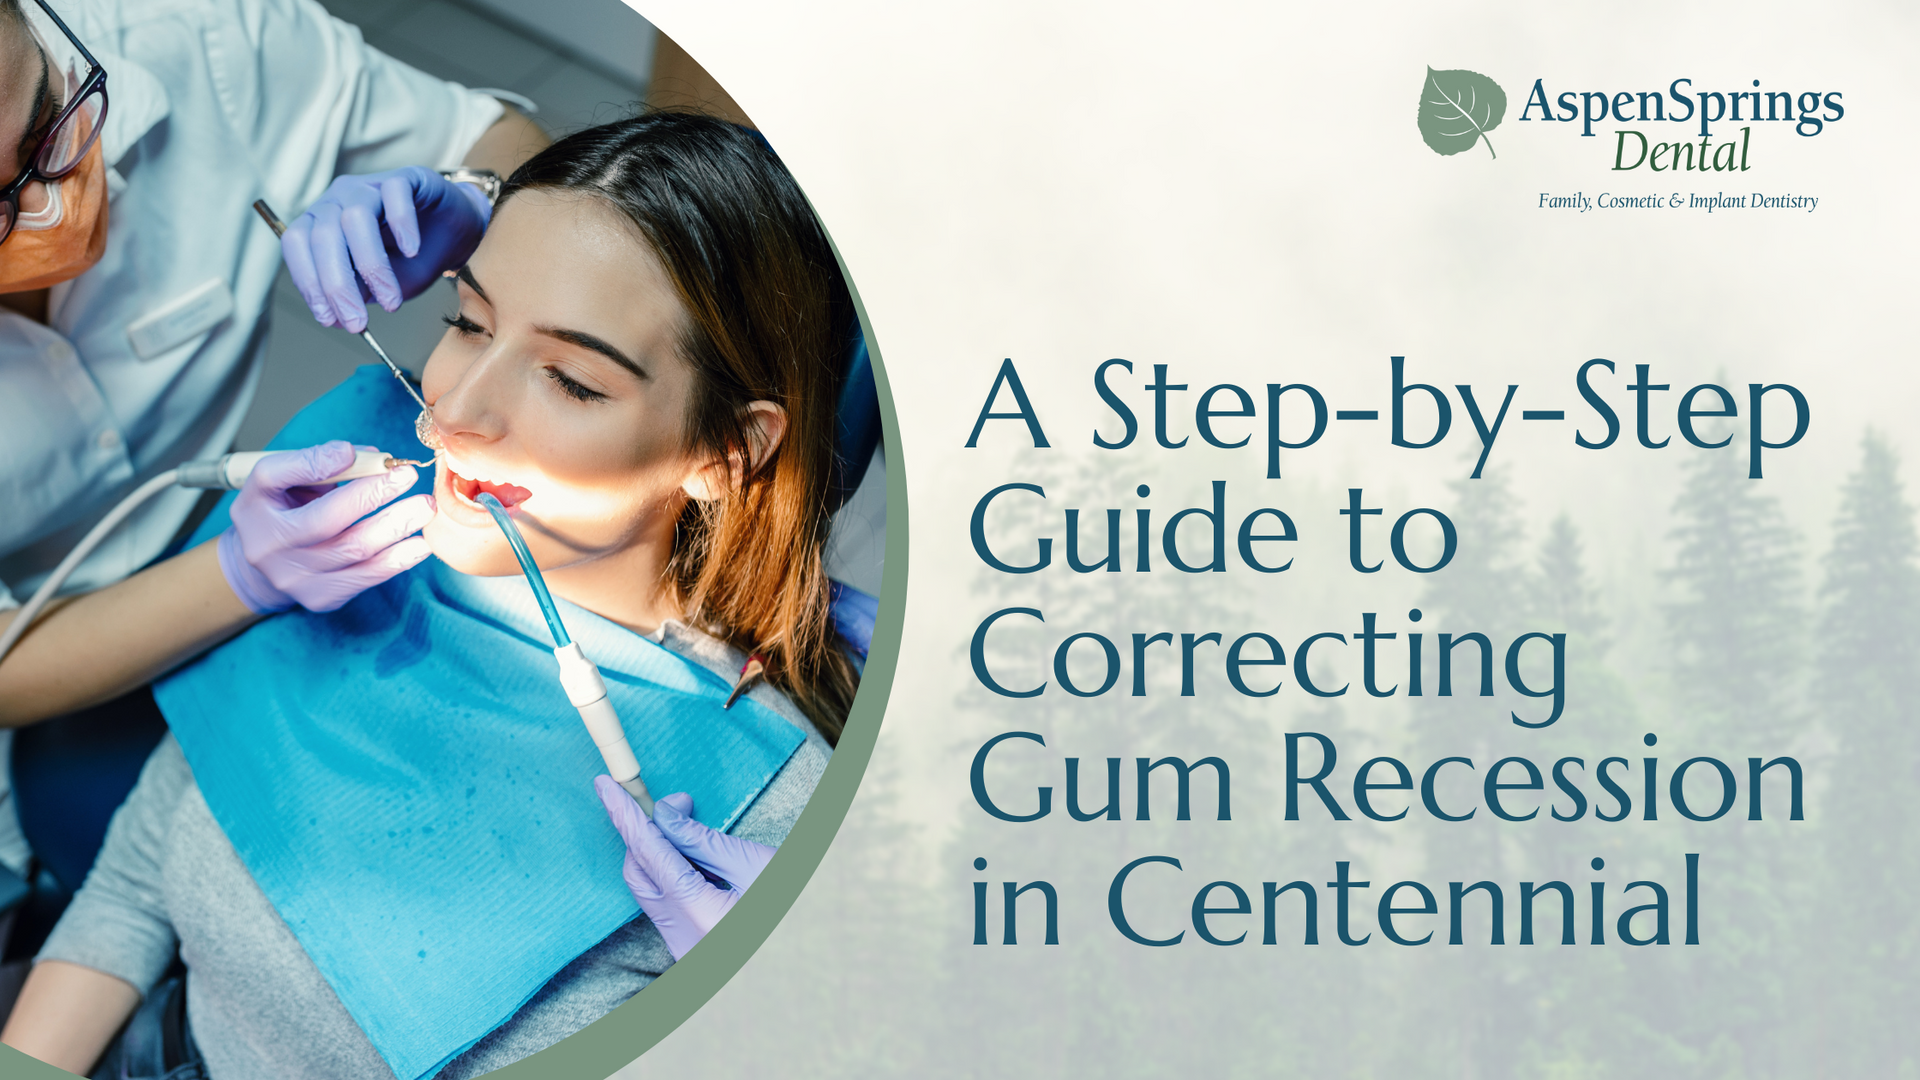 Woman in dental surgery with title A Step-by-Step Guide to Correcting Gum Recession in Centennial